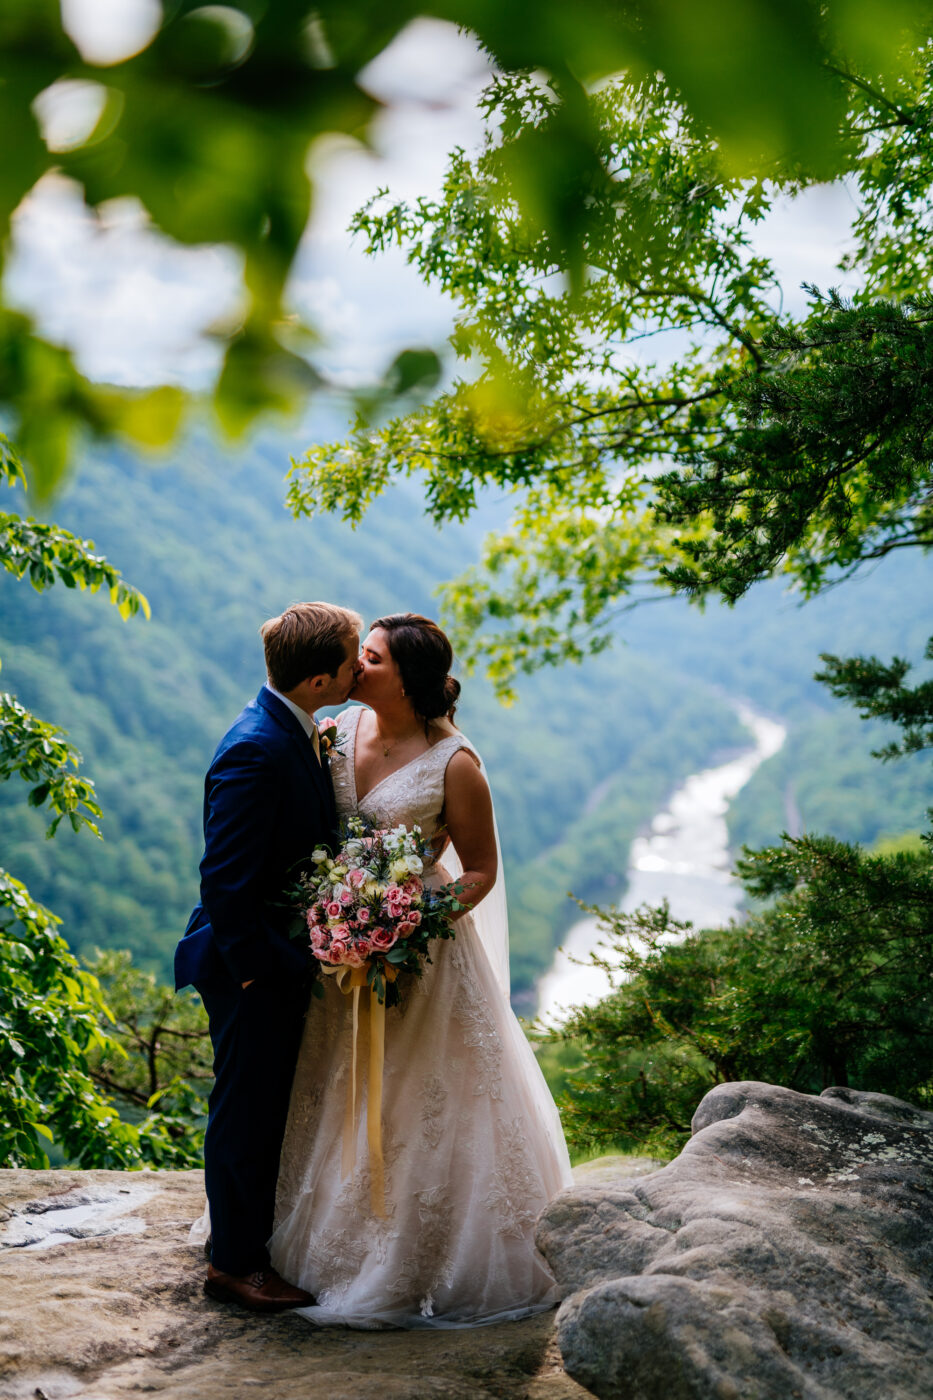 Diana and Ian share a kiss on Beauty Mountain during their elopement in Fayetteville, WV.